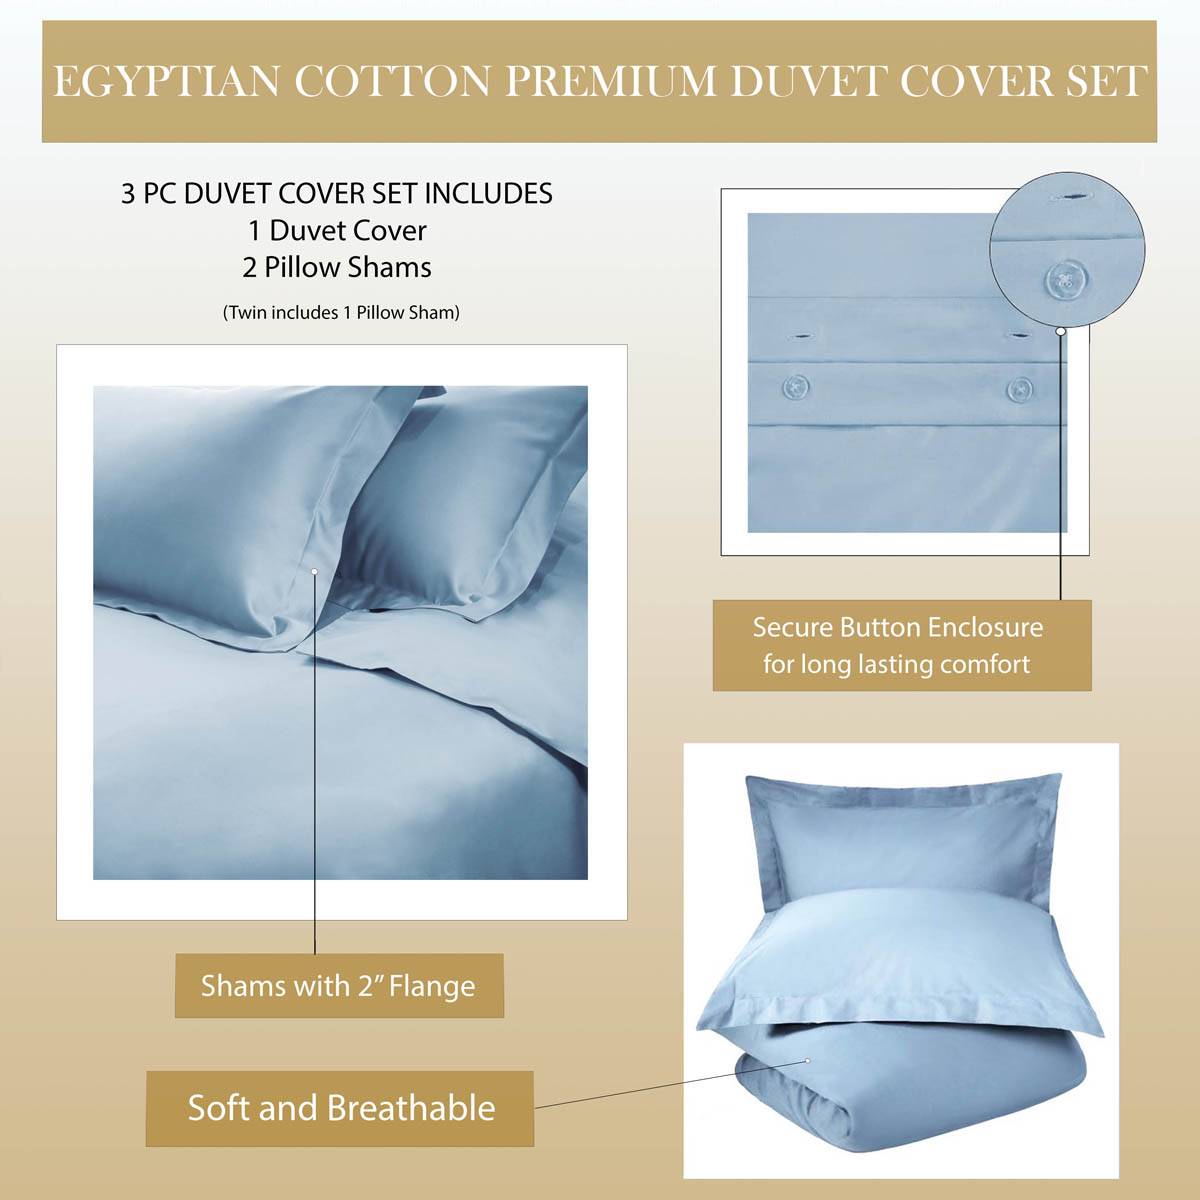 Superior 300 Thread Count Solid Egyptian Cotton Duvet Cover Set